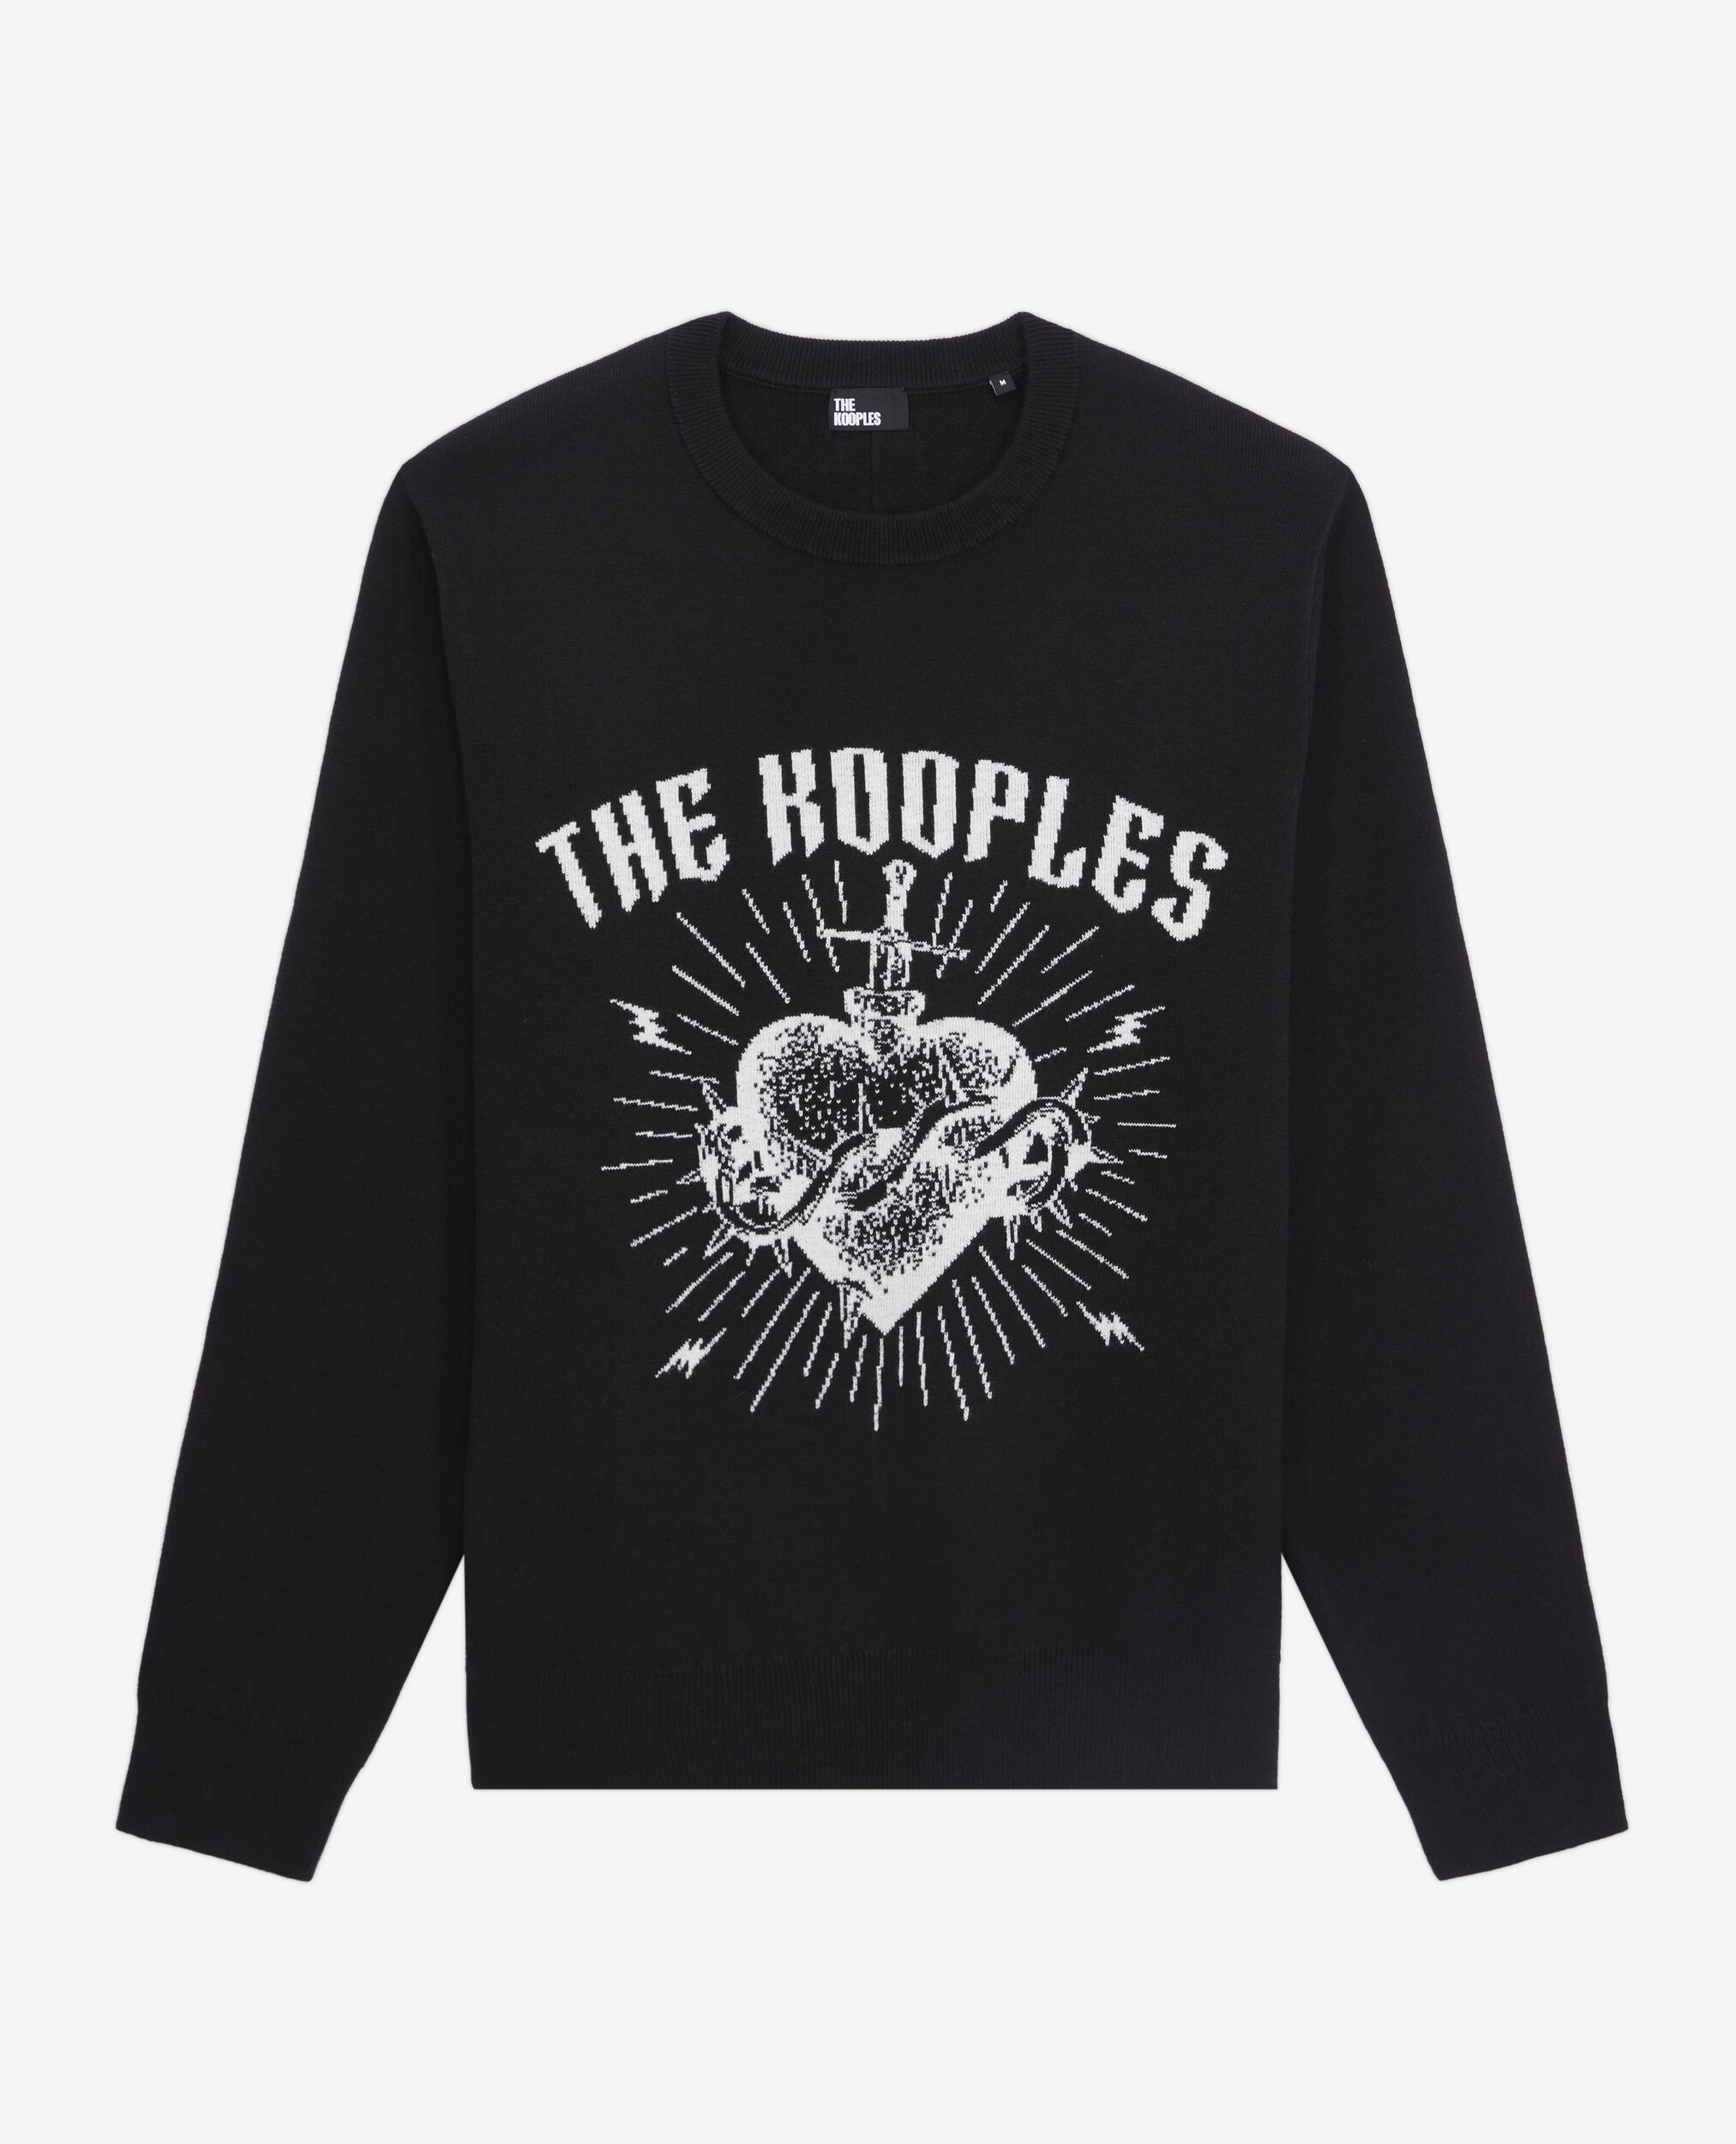 Dagger through heart black sweater in wool blend, BLACK / WHITE, hi-res image number null